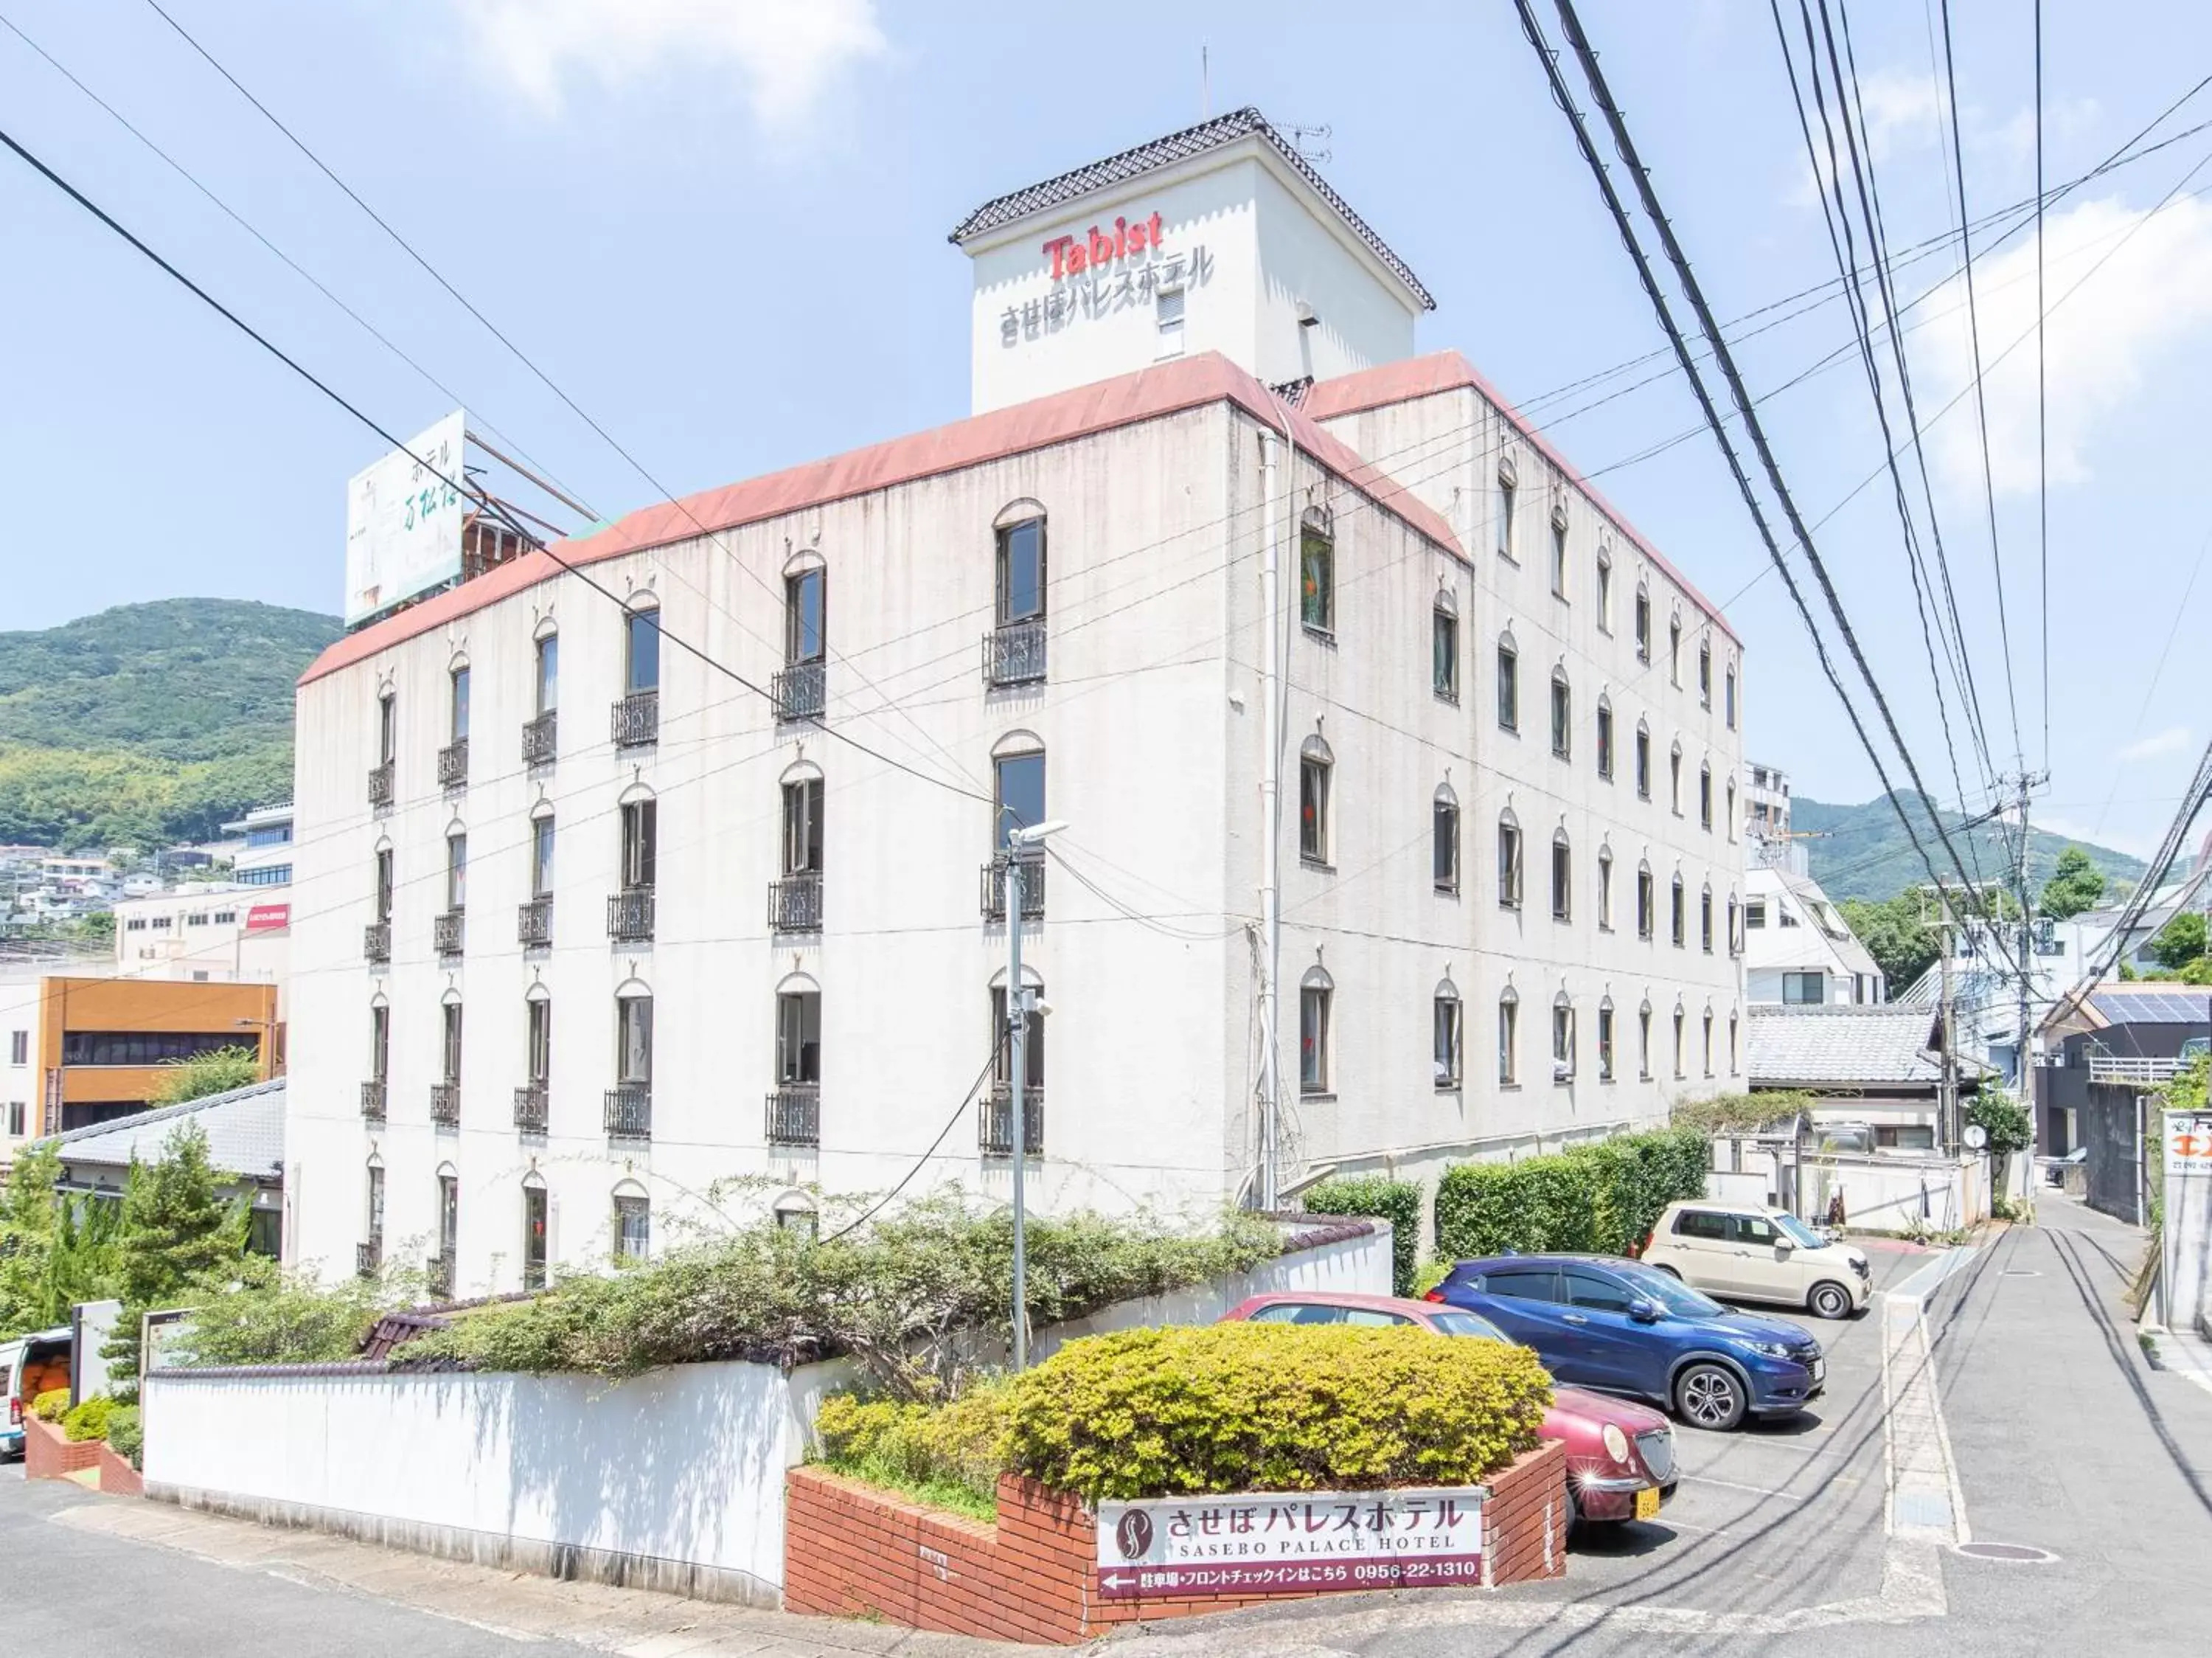 Property Building in Tabist Sasebo Palace Hotel